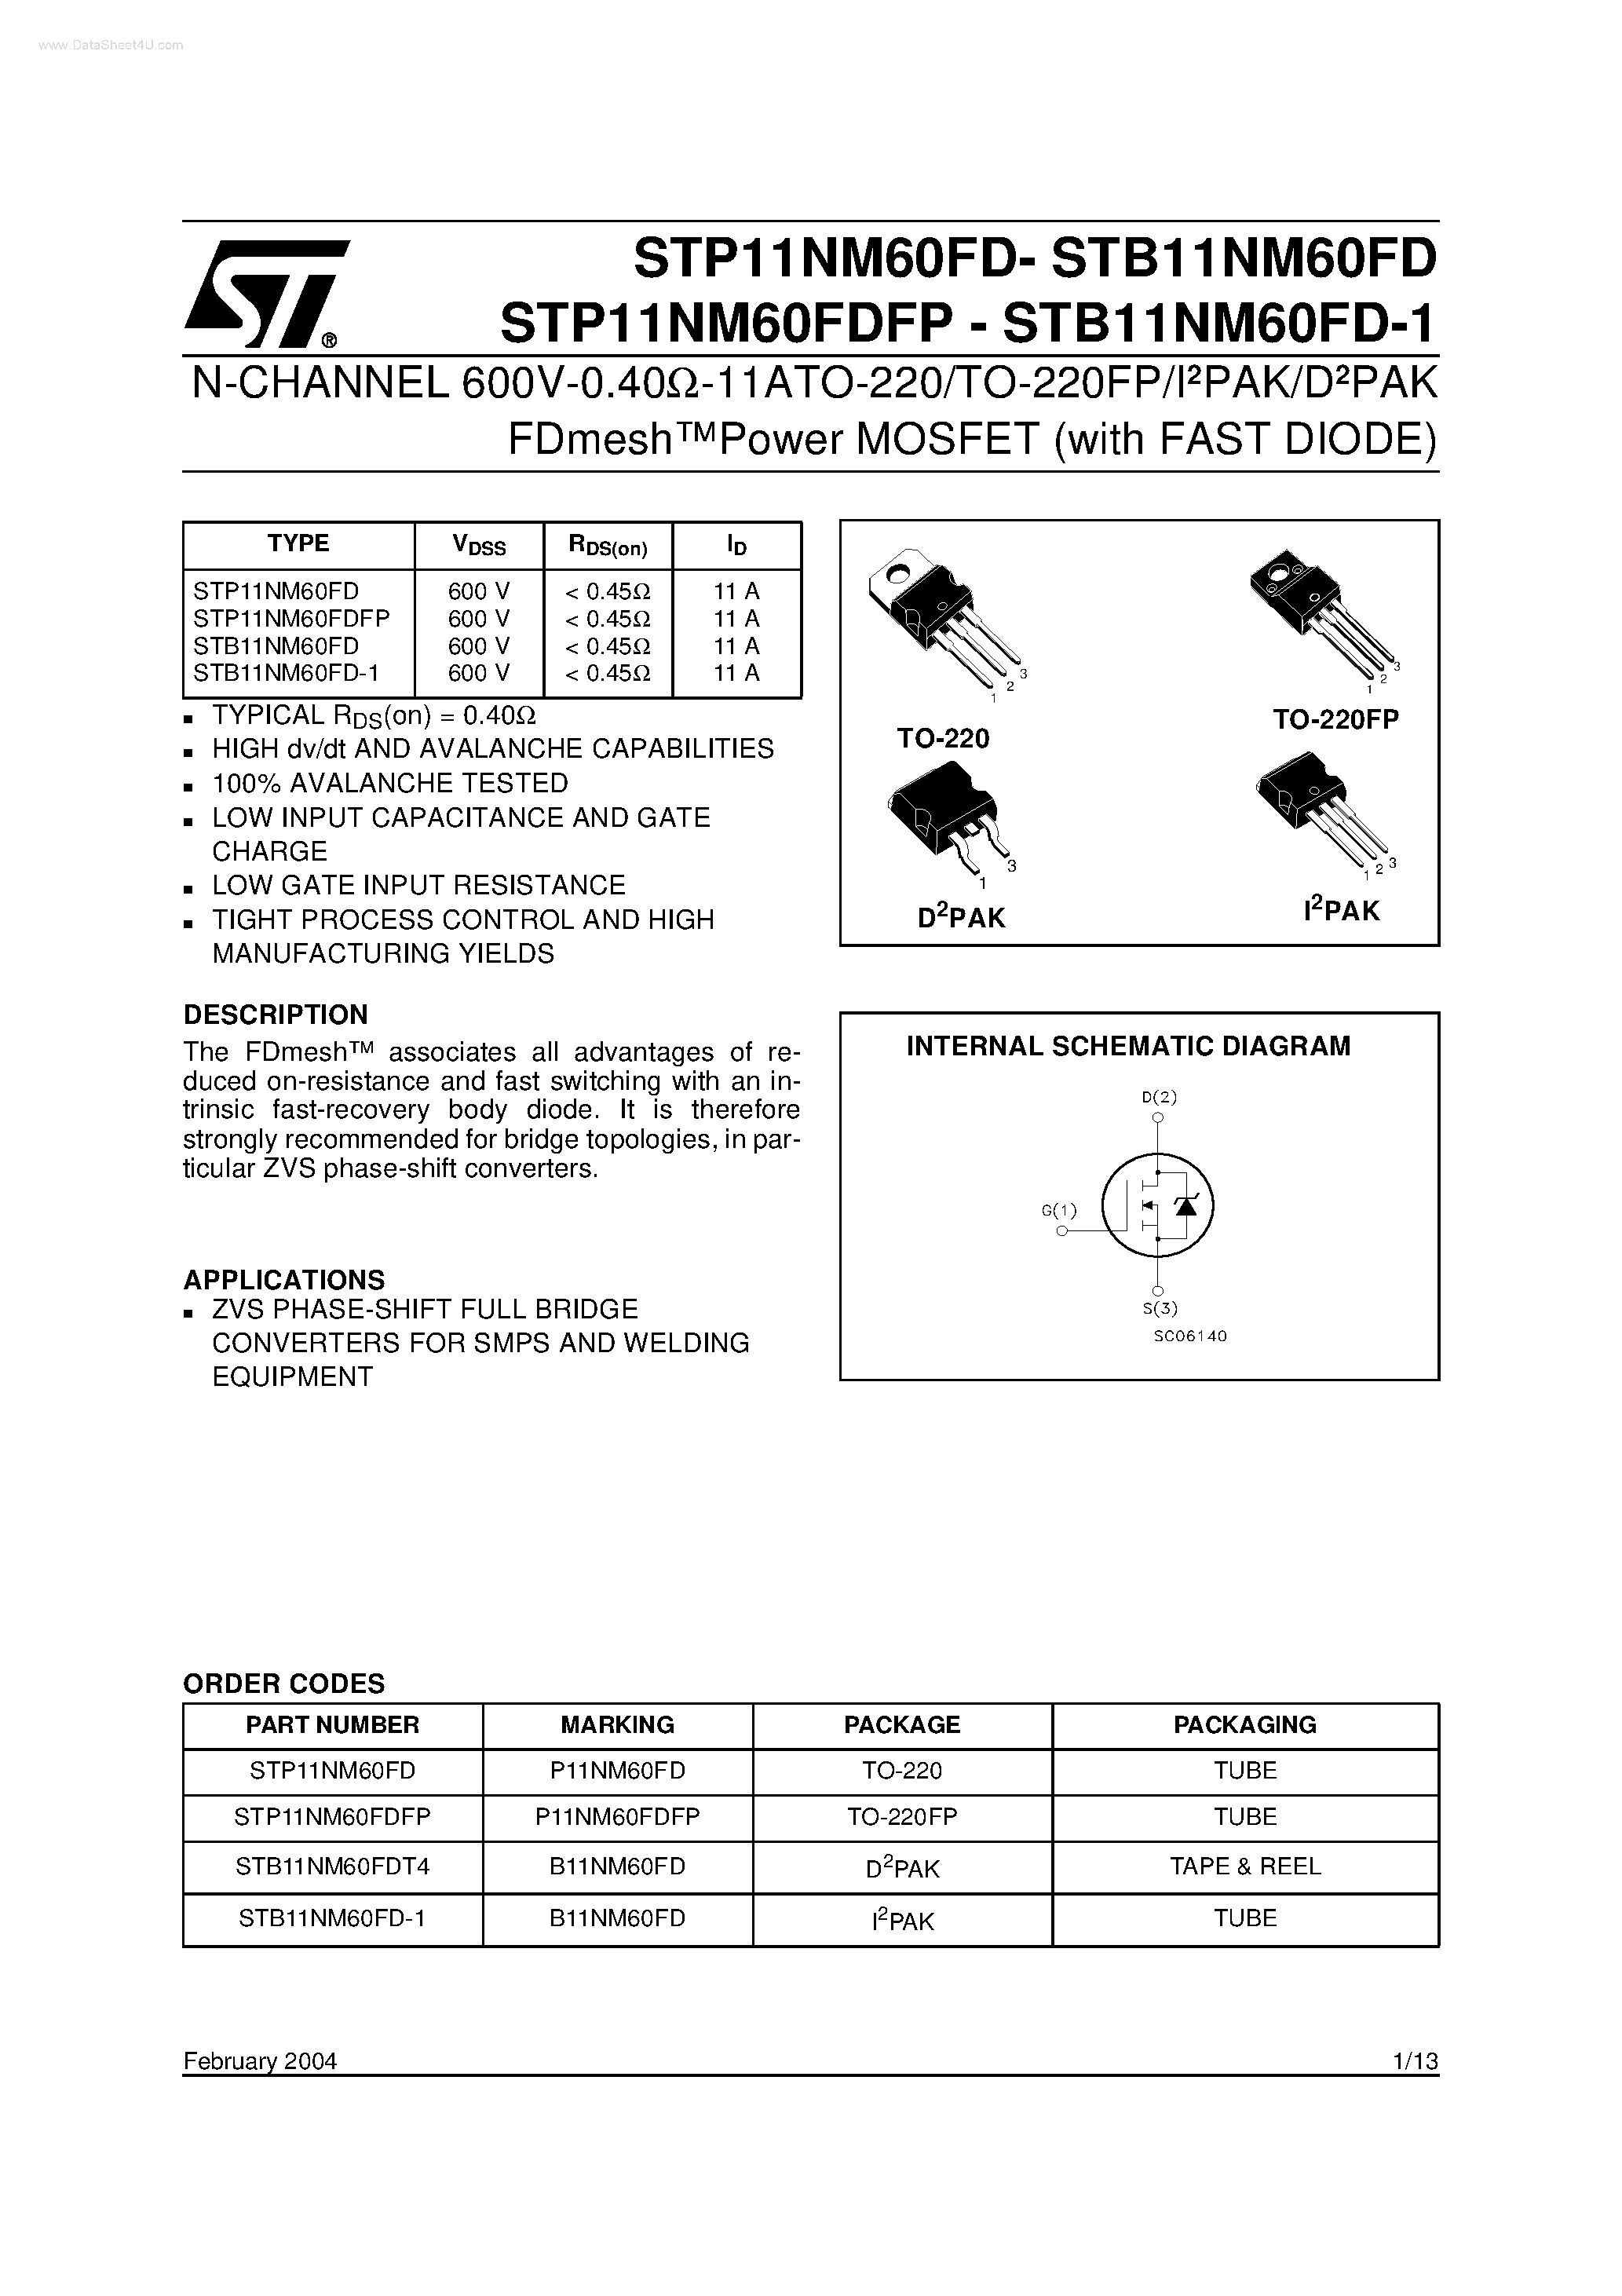 Datasheet STP11NM60FD - N-CHANNEL Power MOSFET page 1